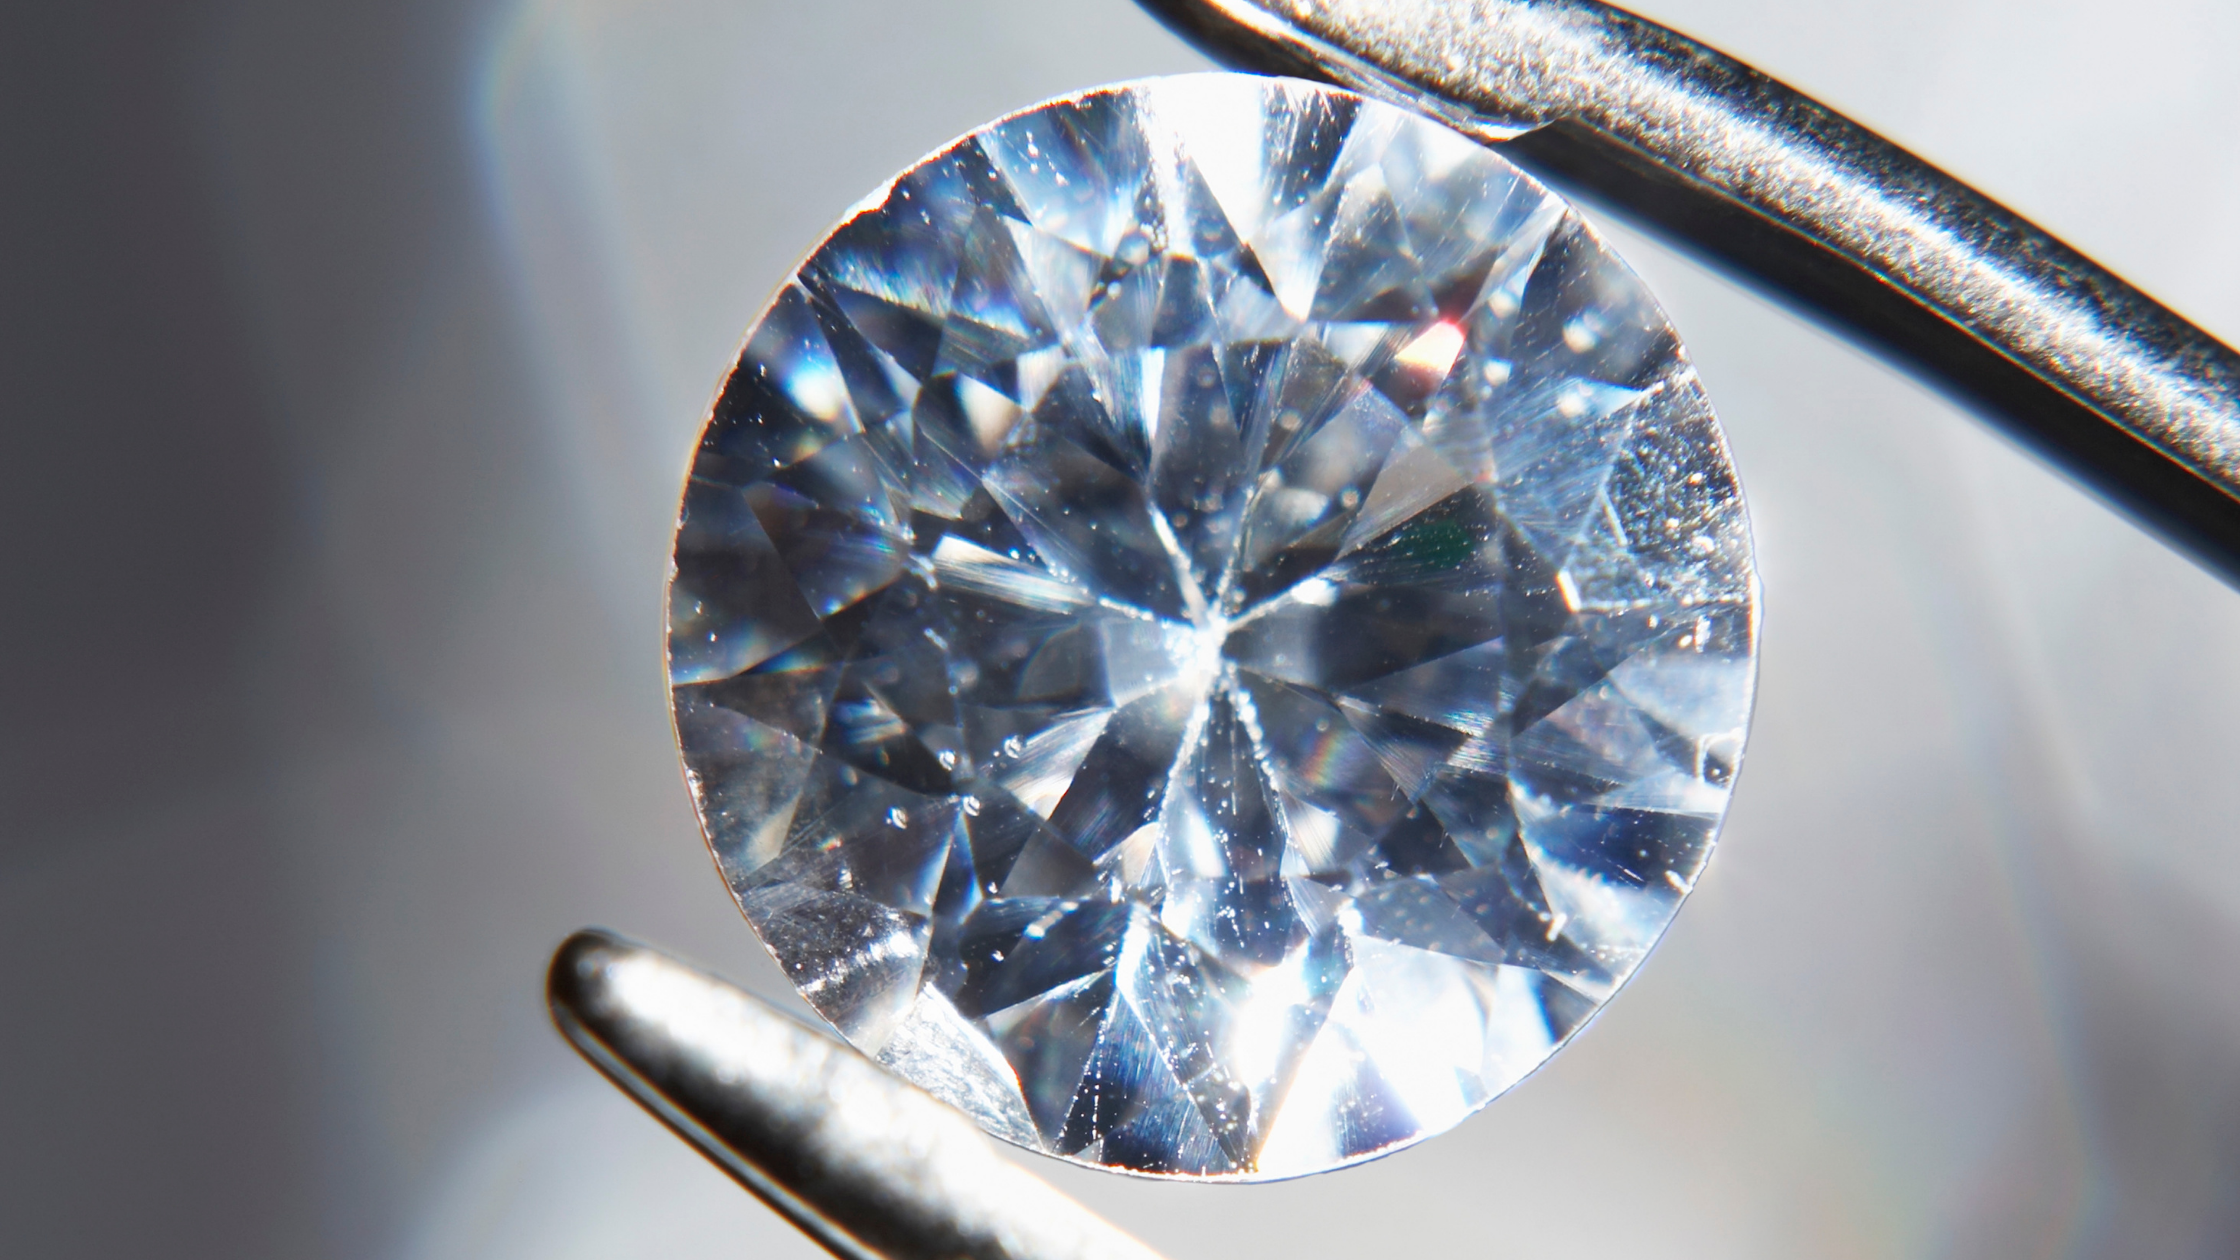 What Are Inclusions In Diamonds?